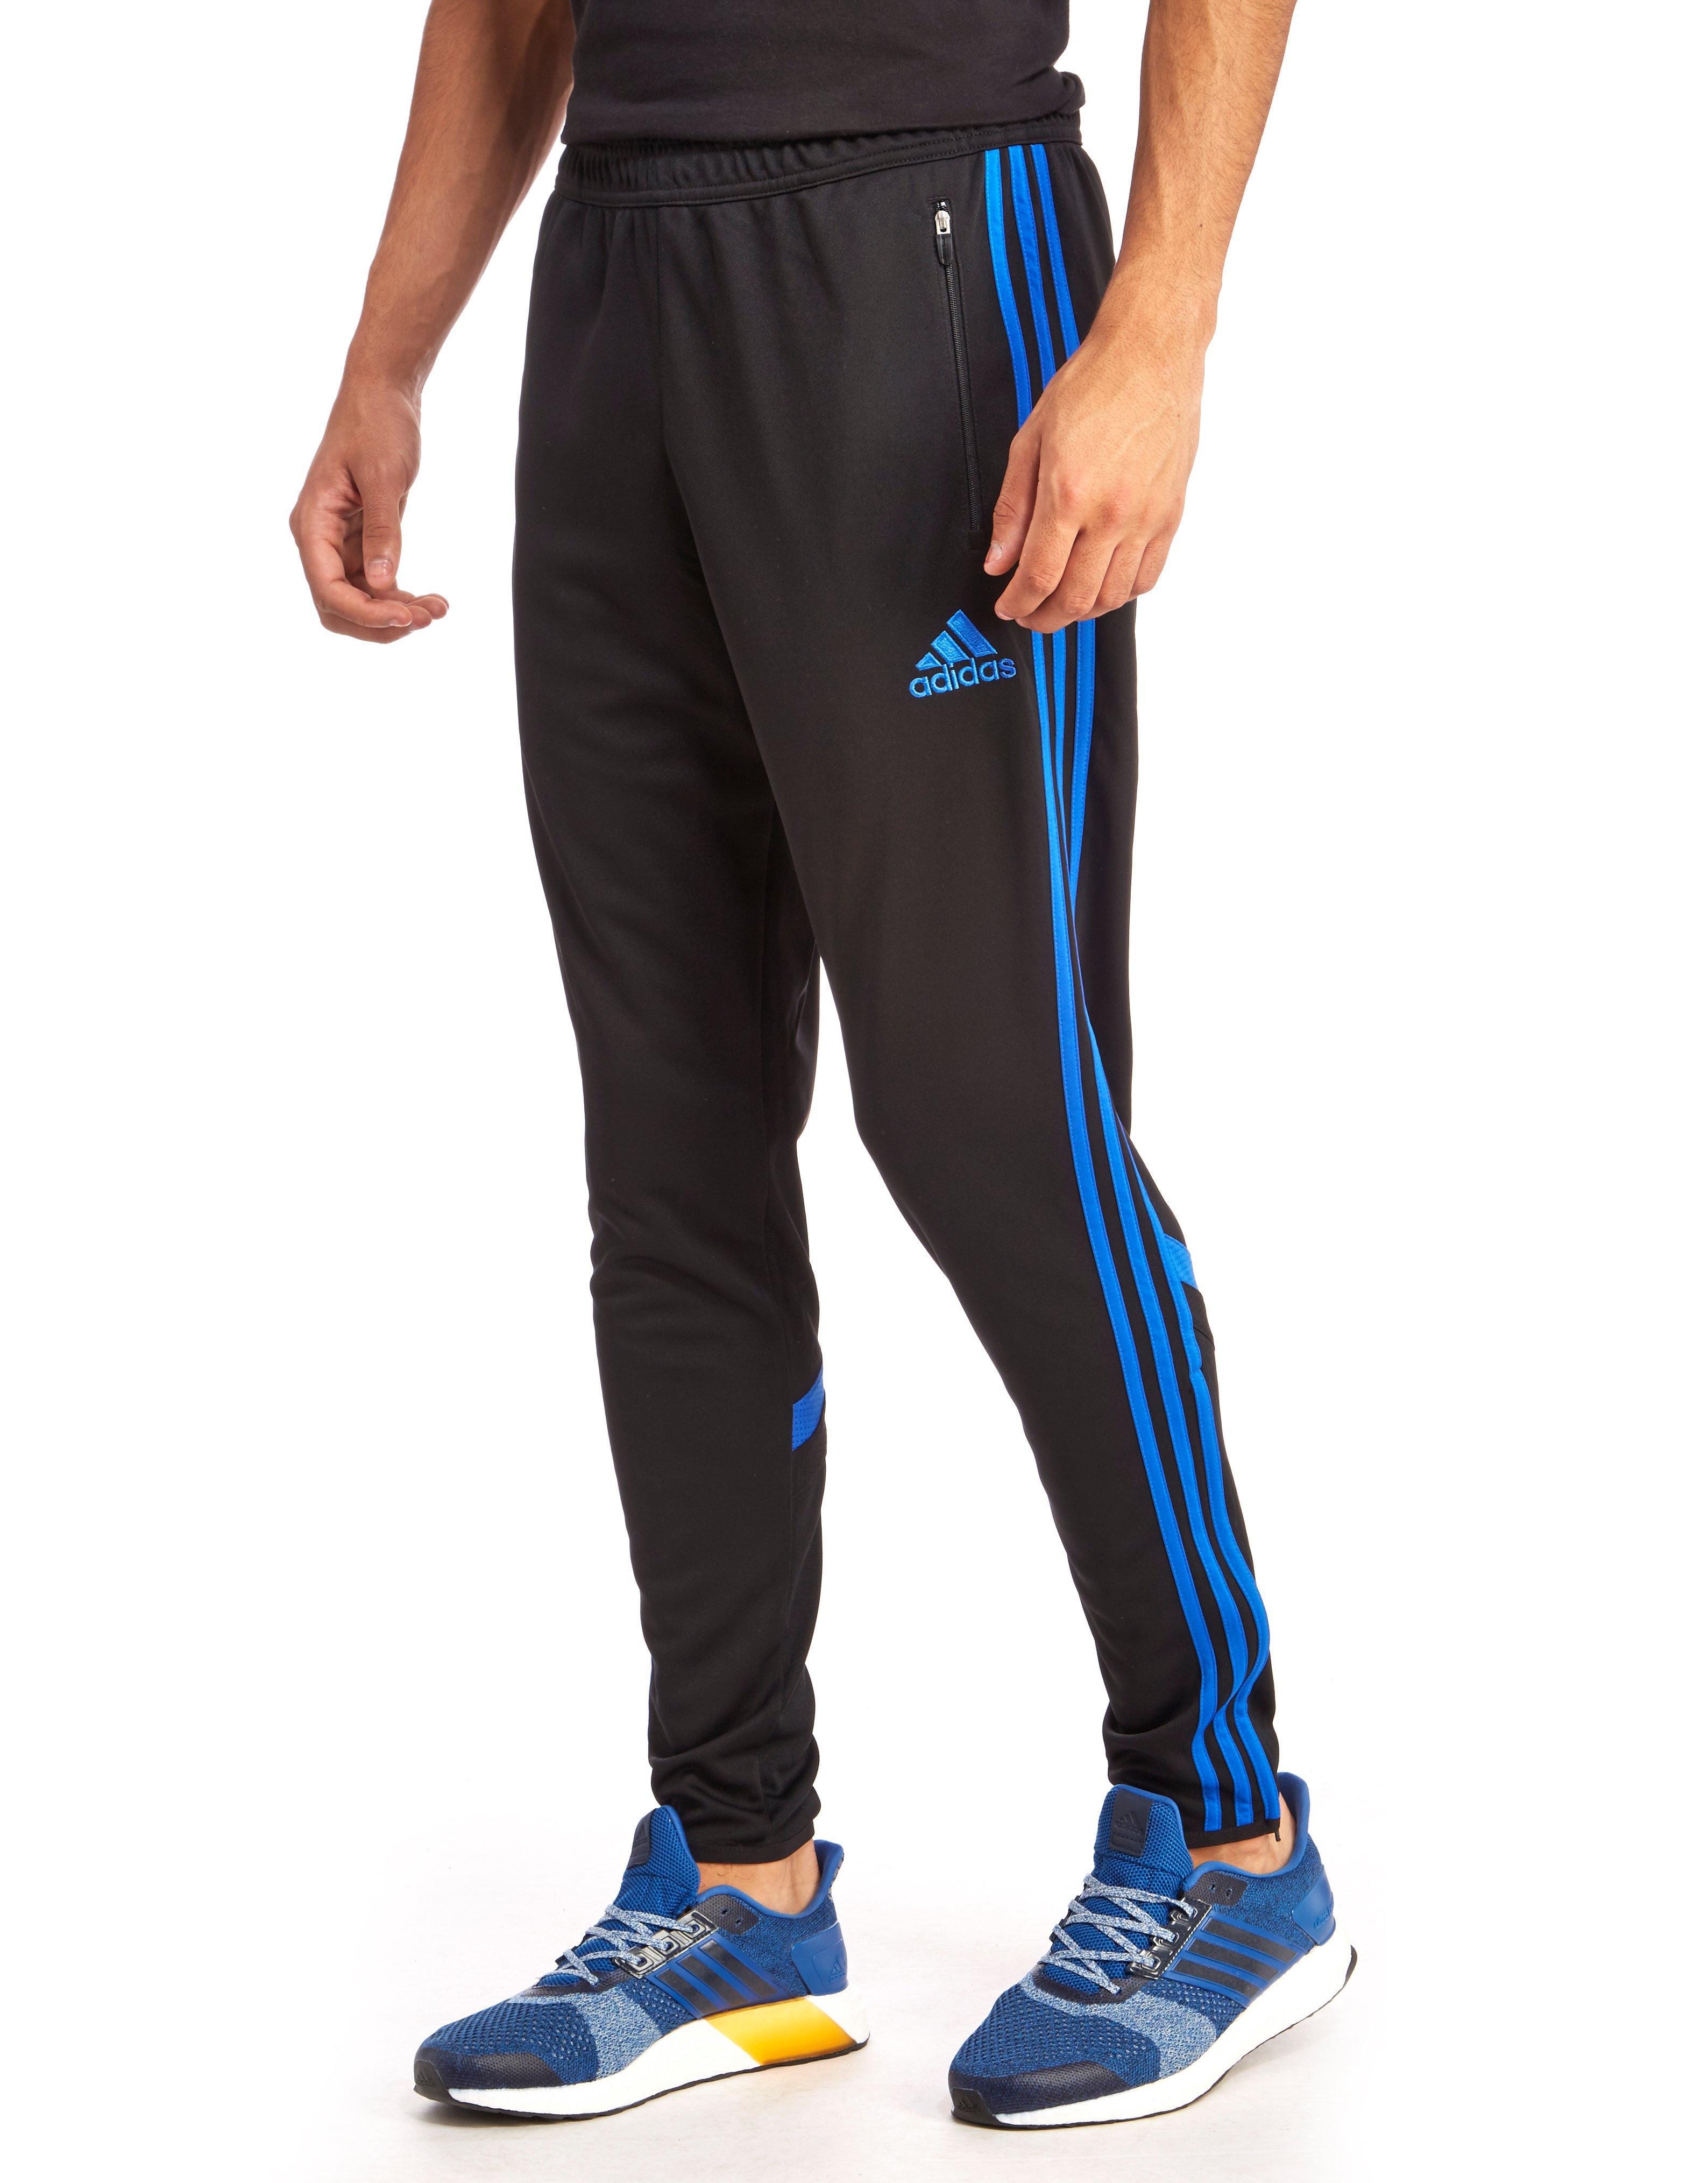 Lyst - Adidas Condivo Poly Training Pants in Black for Men